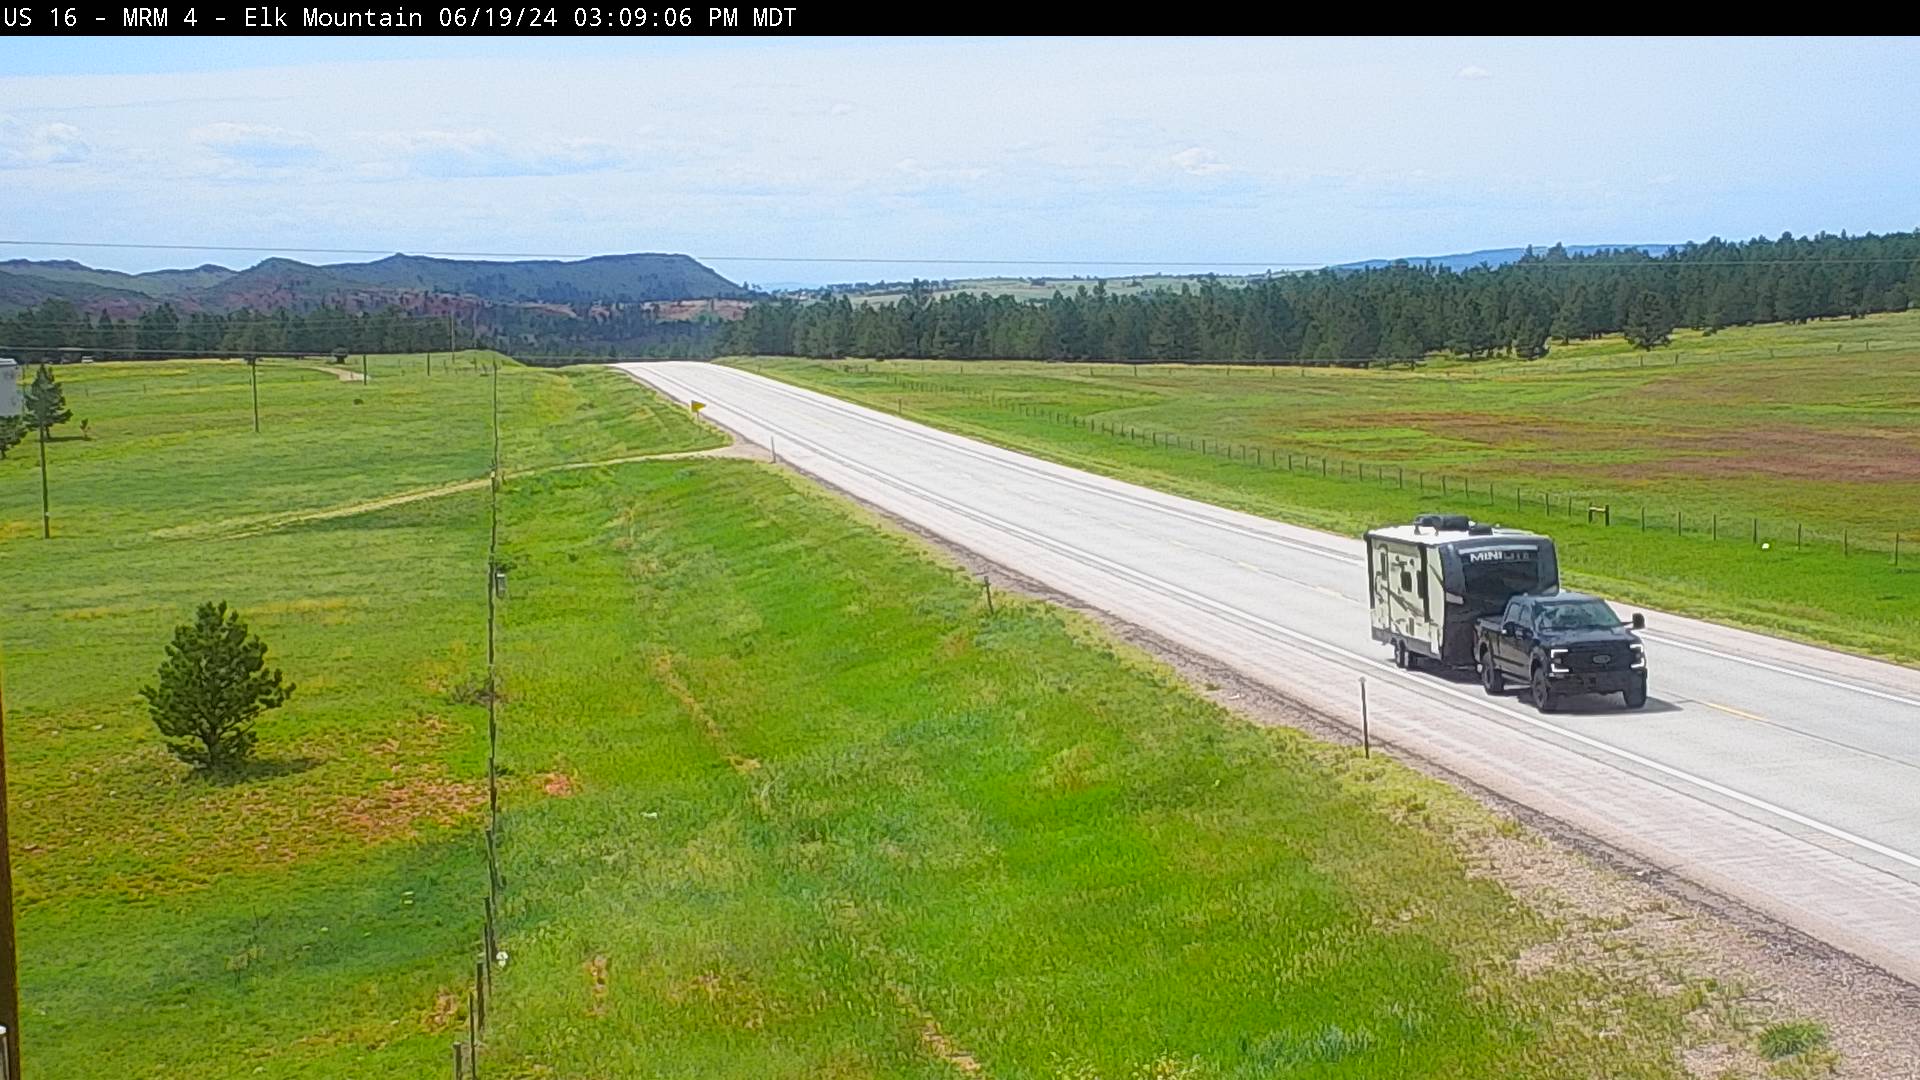 Traffic Cam 23 miles west of Custer along US-16 @ MM 4 - West Player